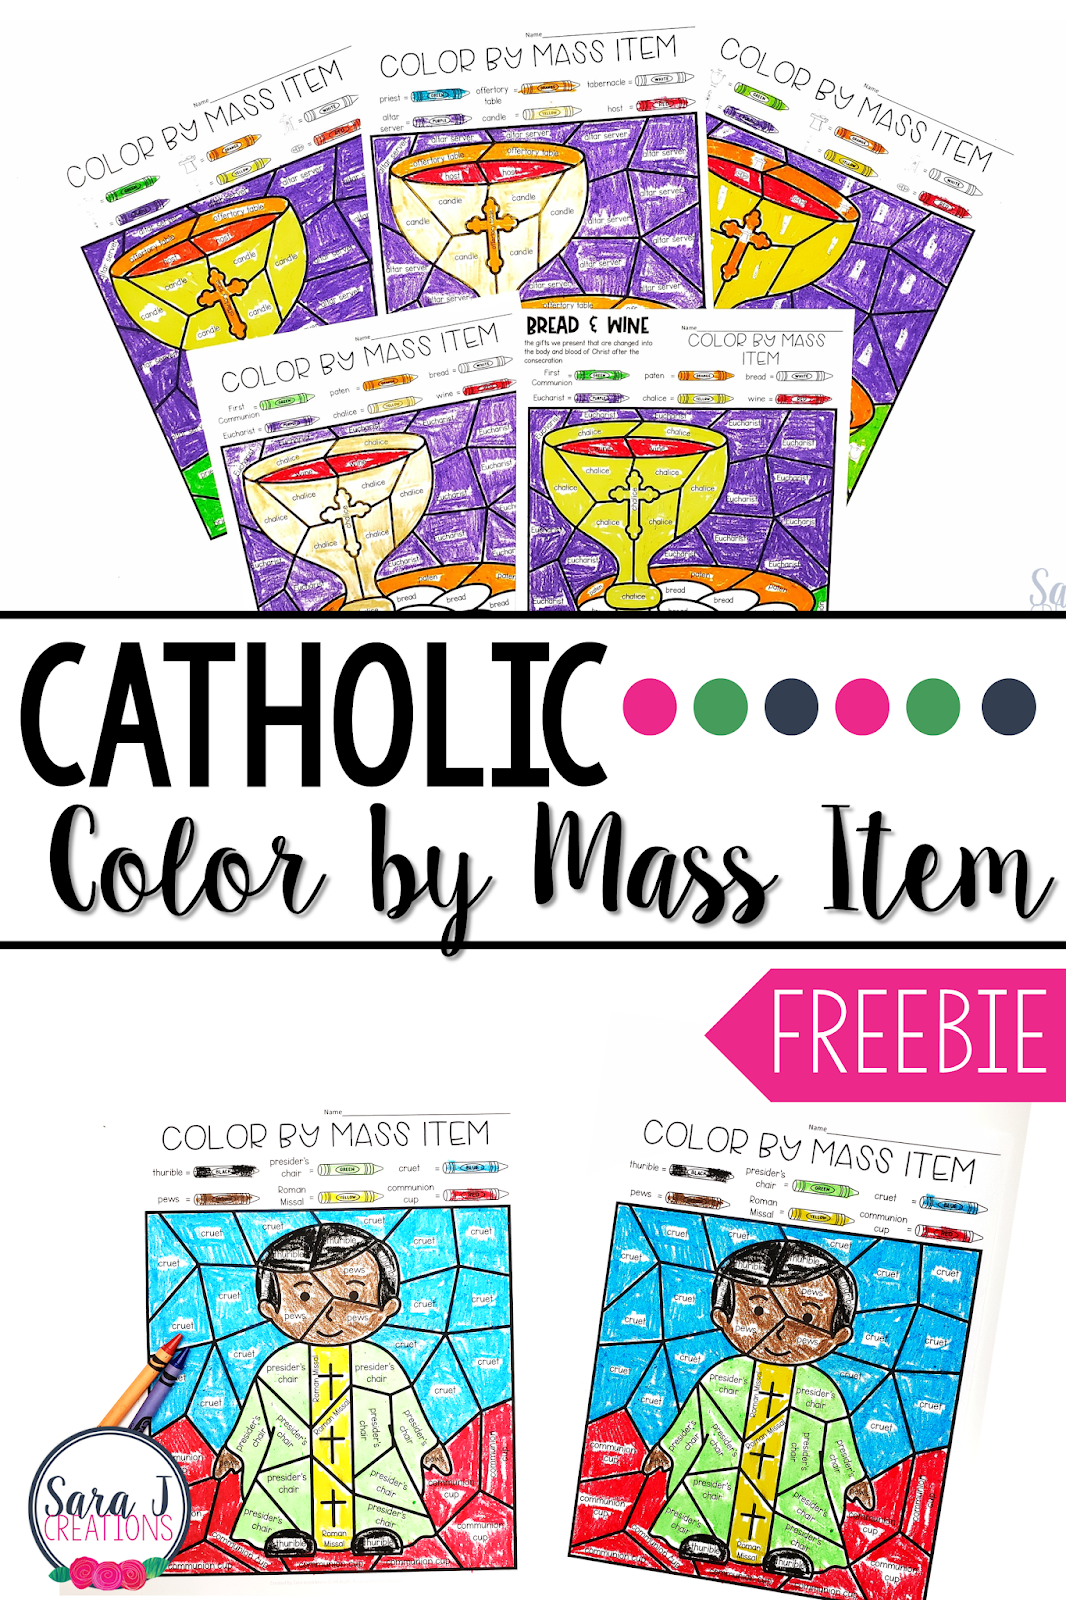 FREE Catholic Color by Mass Item Coloring Pages. Try out these fun and engaging coloring pages. A great way to teach your students about the items we use during Mass. The free set focuses on the priest and the bread & wine.